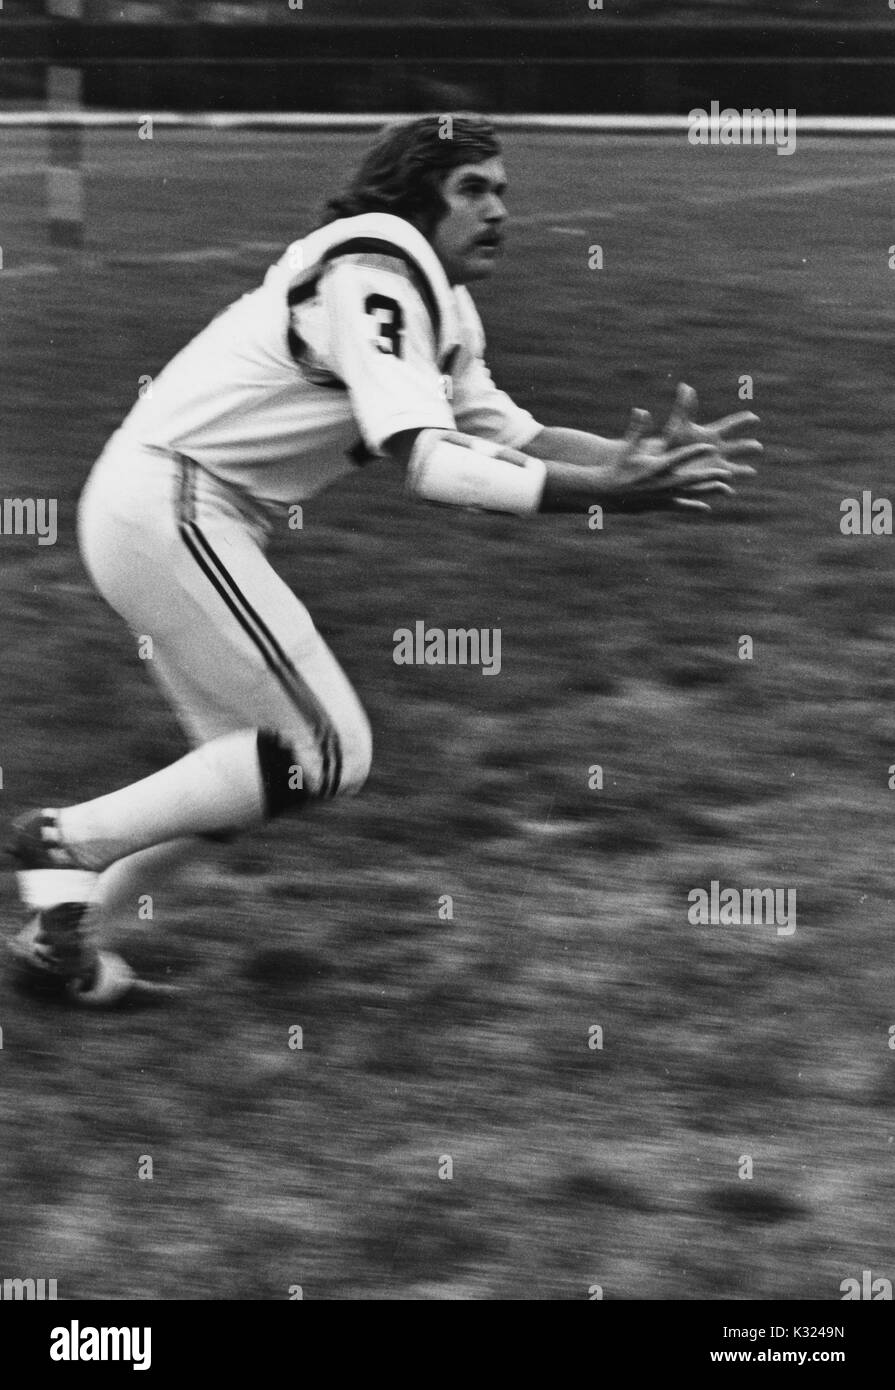 Johns Hopkins University football player Bill Nolan reaches his hands out in anticipation of a pass, 1972. Stock Photo